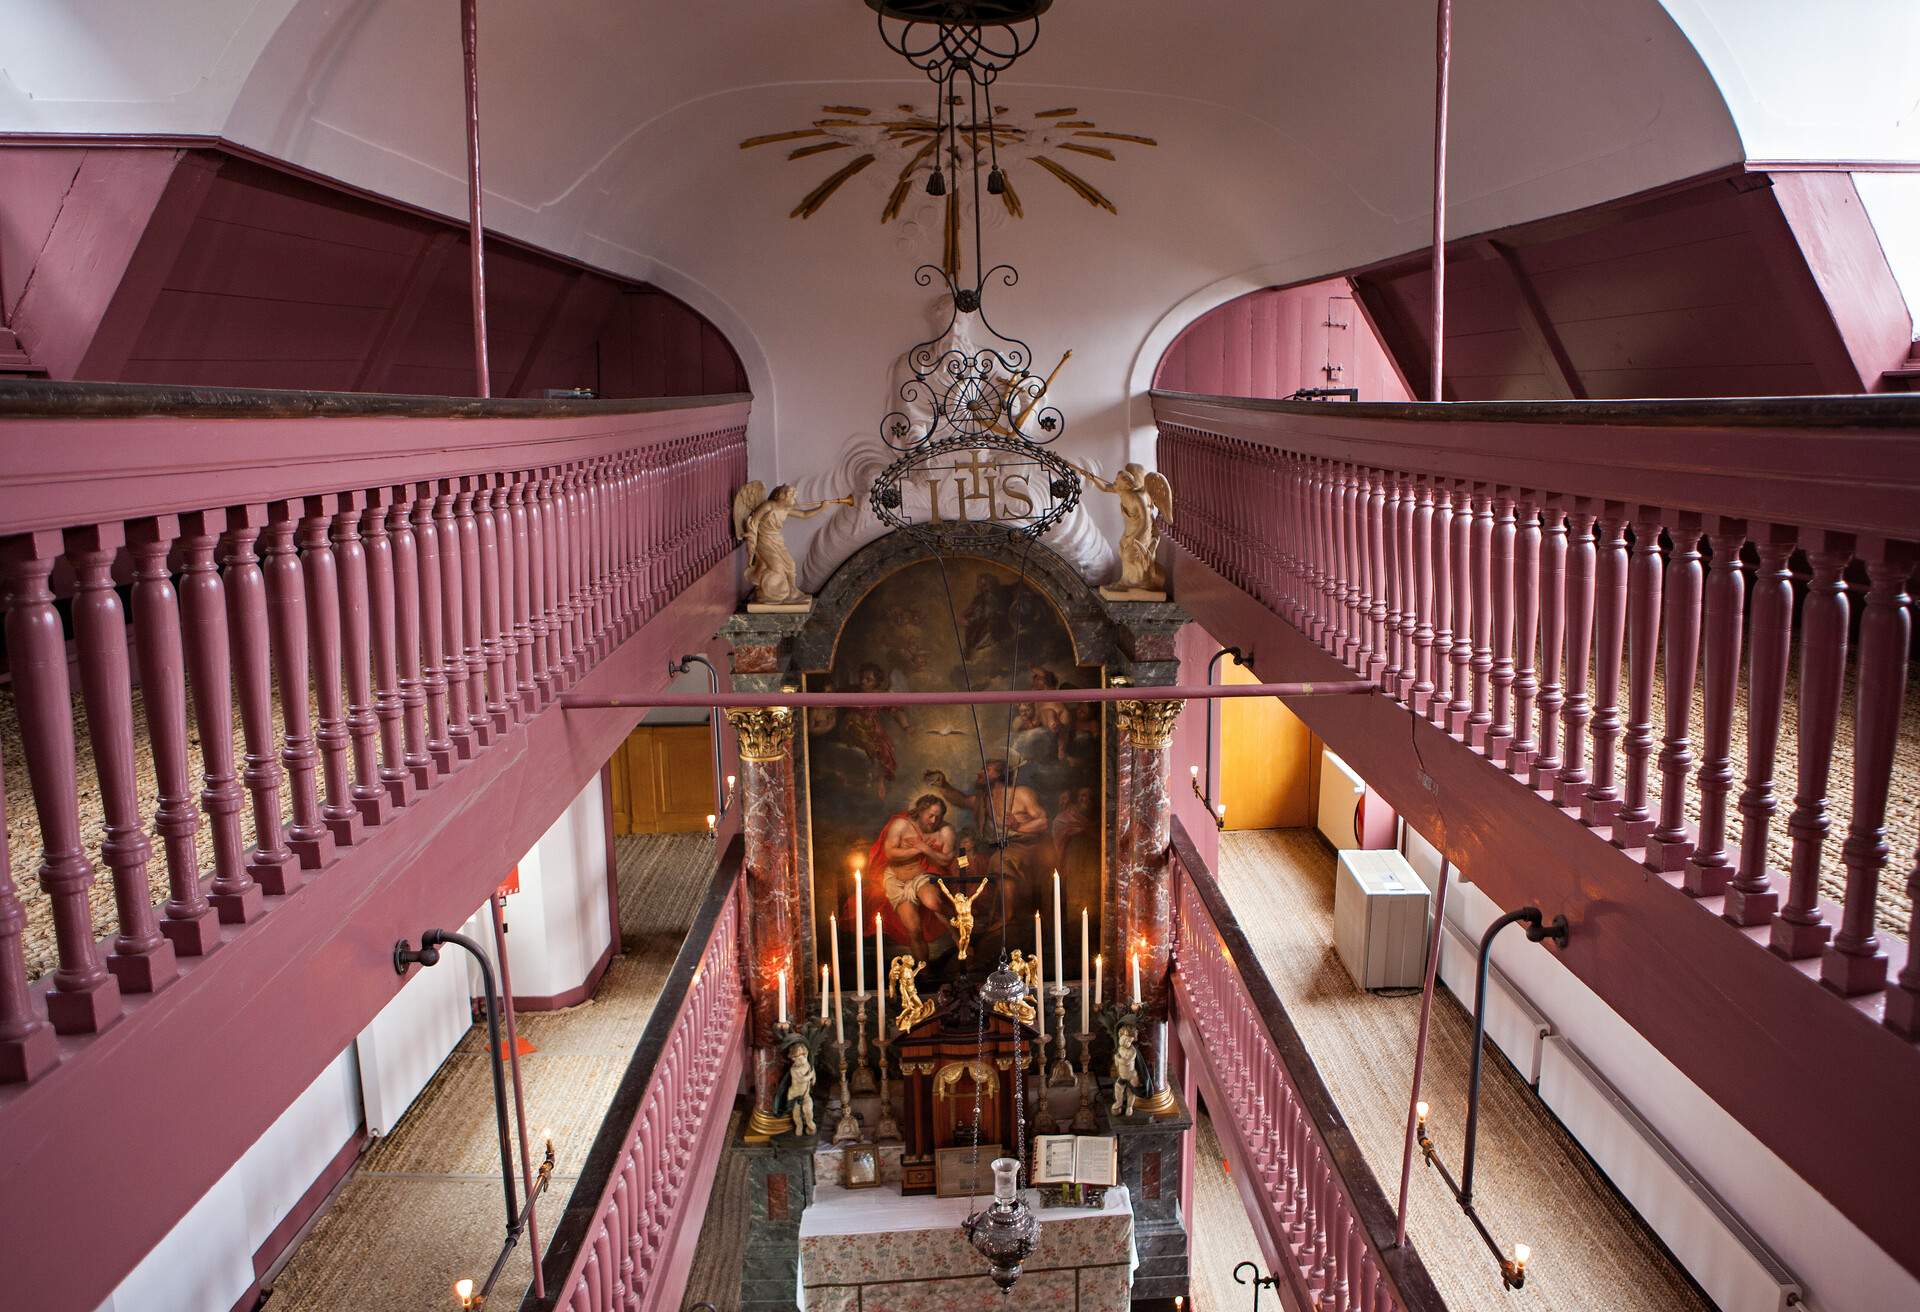 The small church 'Ons Lieve Heer Op Solder' with it's alter in the middle and pink railing